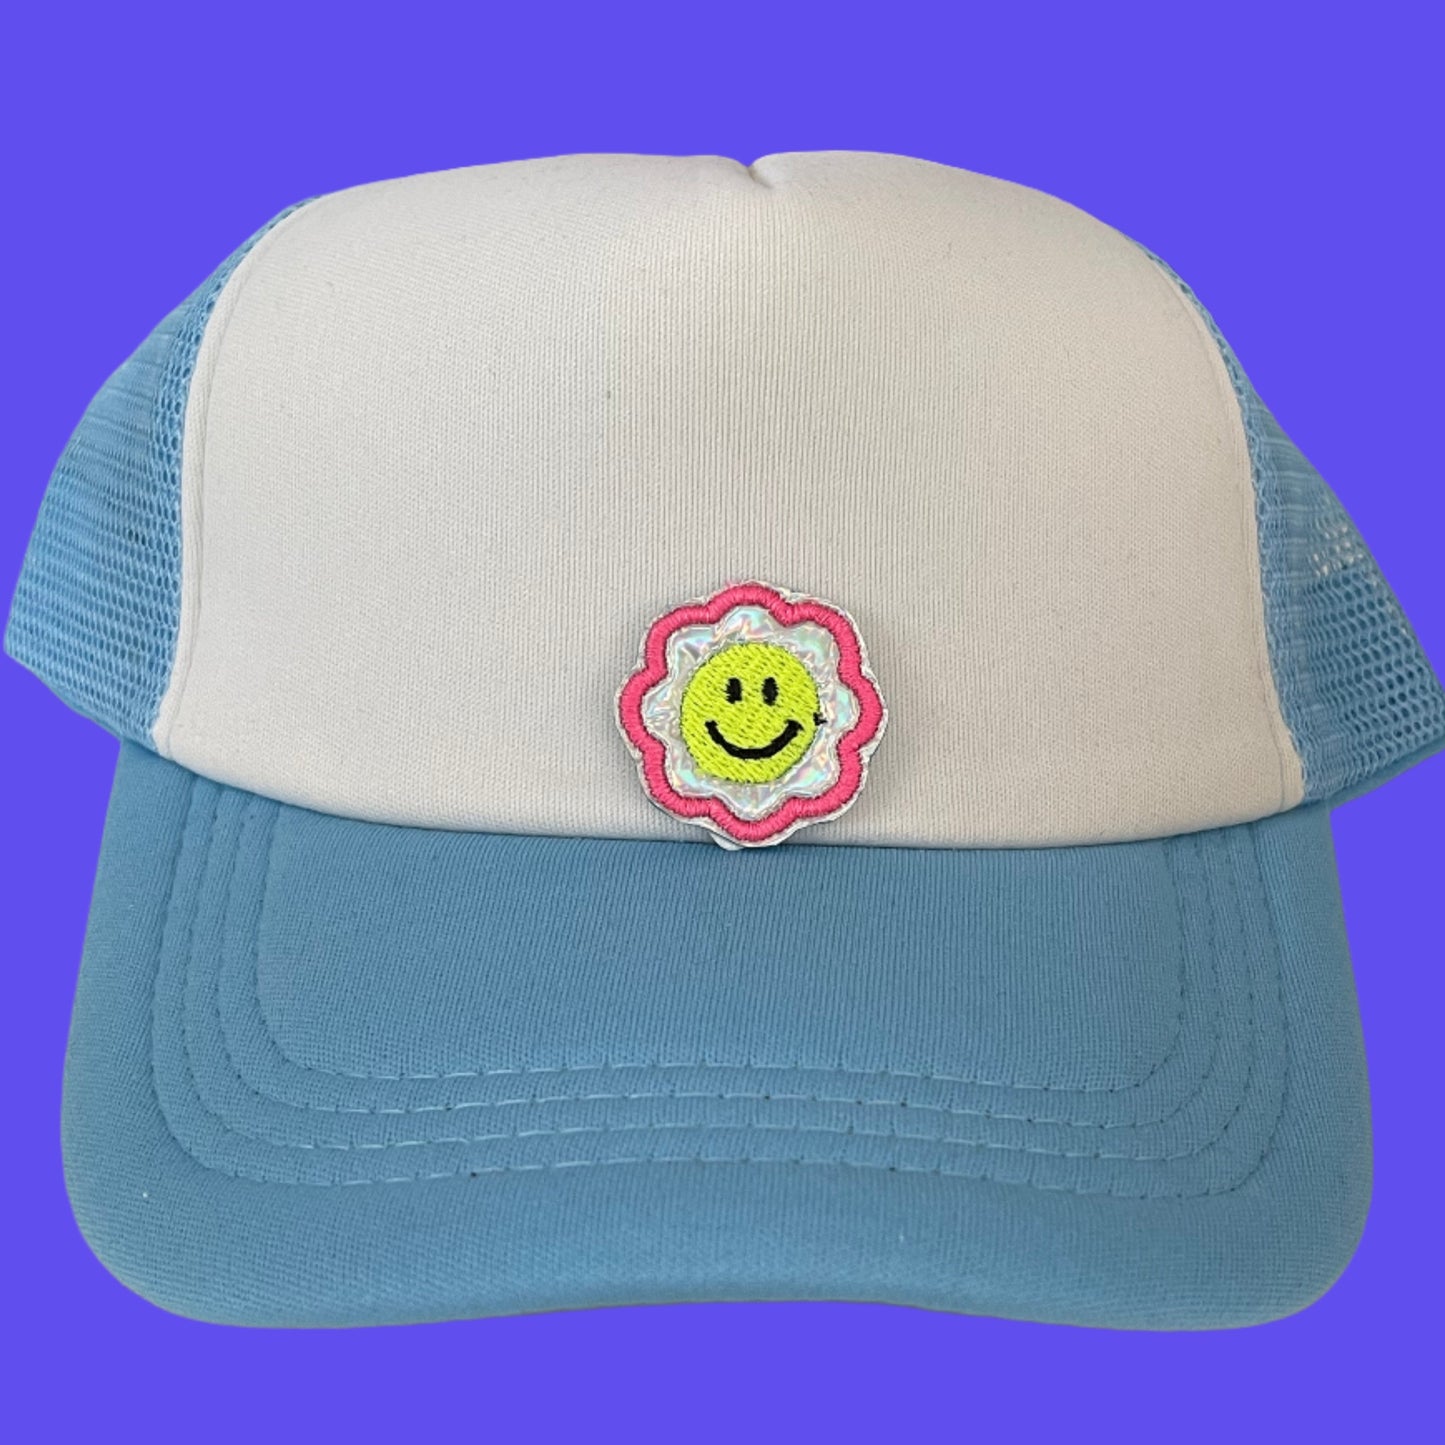 Close-up of a Smiley Flower embroidered patch featuring a bright yellow smiley face surrounded by a pink flower, perfect for customizing hats, apparel, and various accessories.